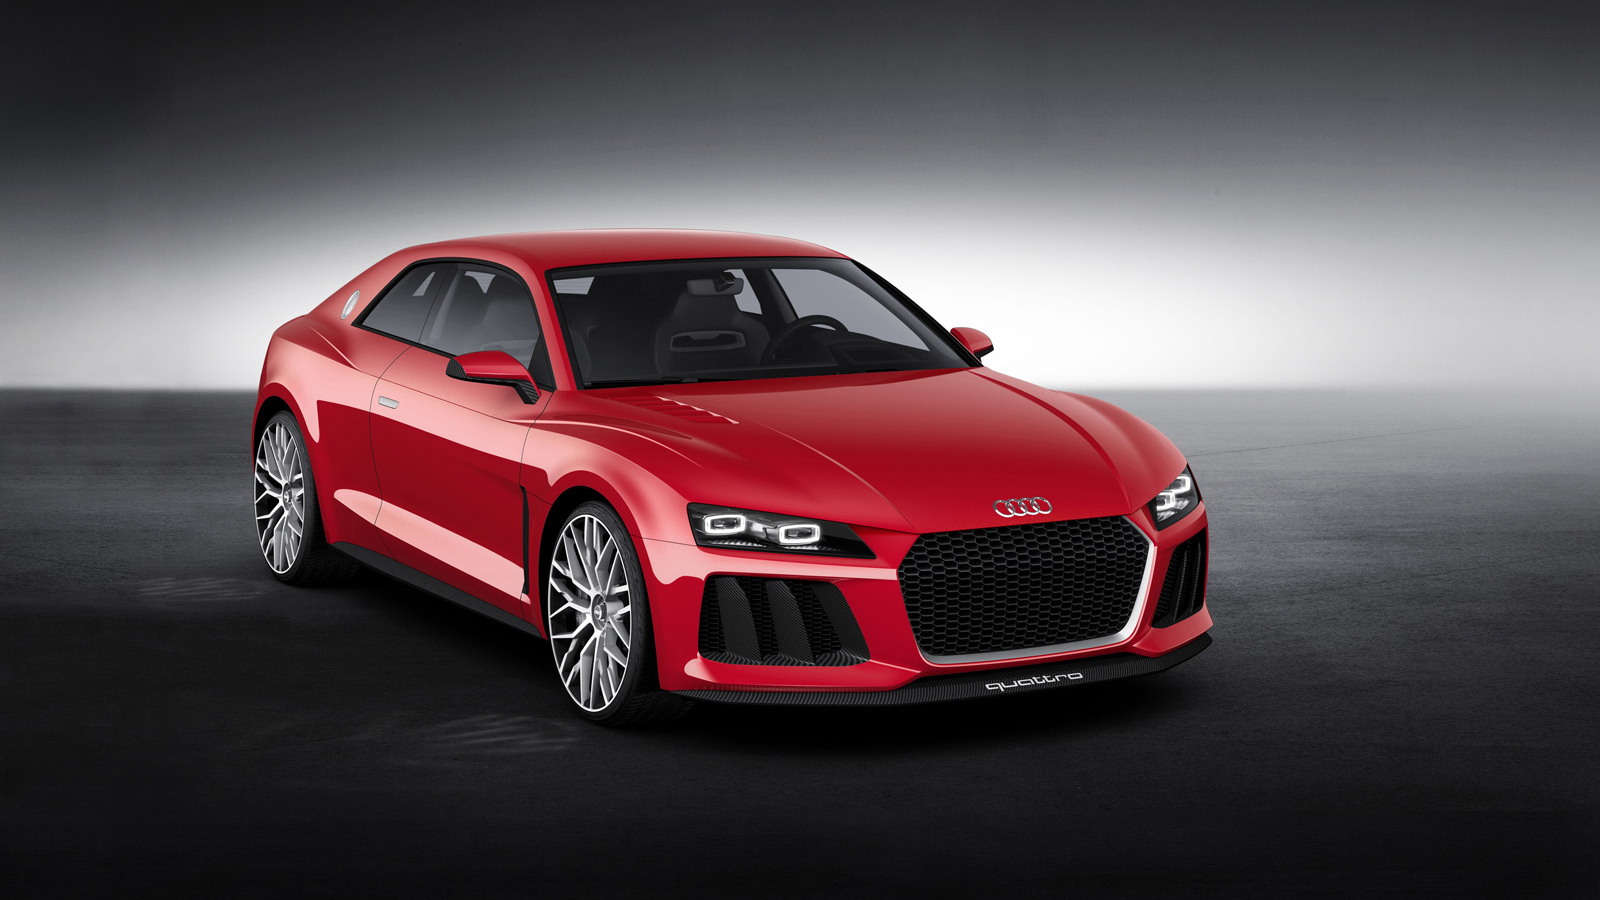 Audi Sport quattro concept with laser headlights, 2014 Consumer Electronics Show